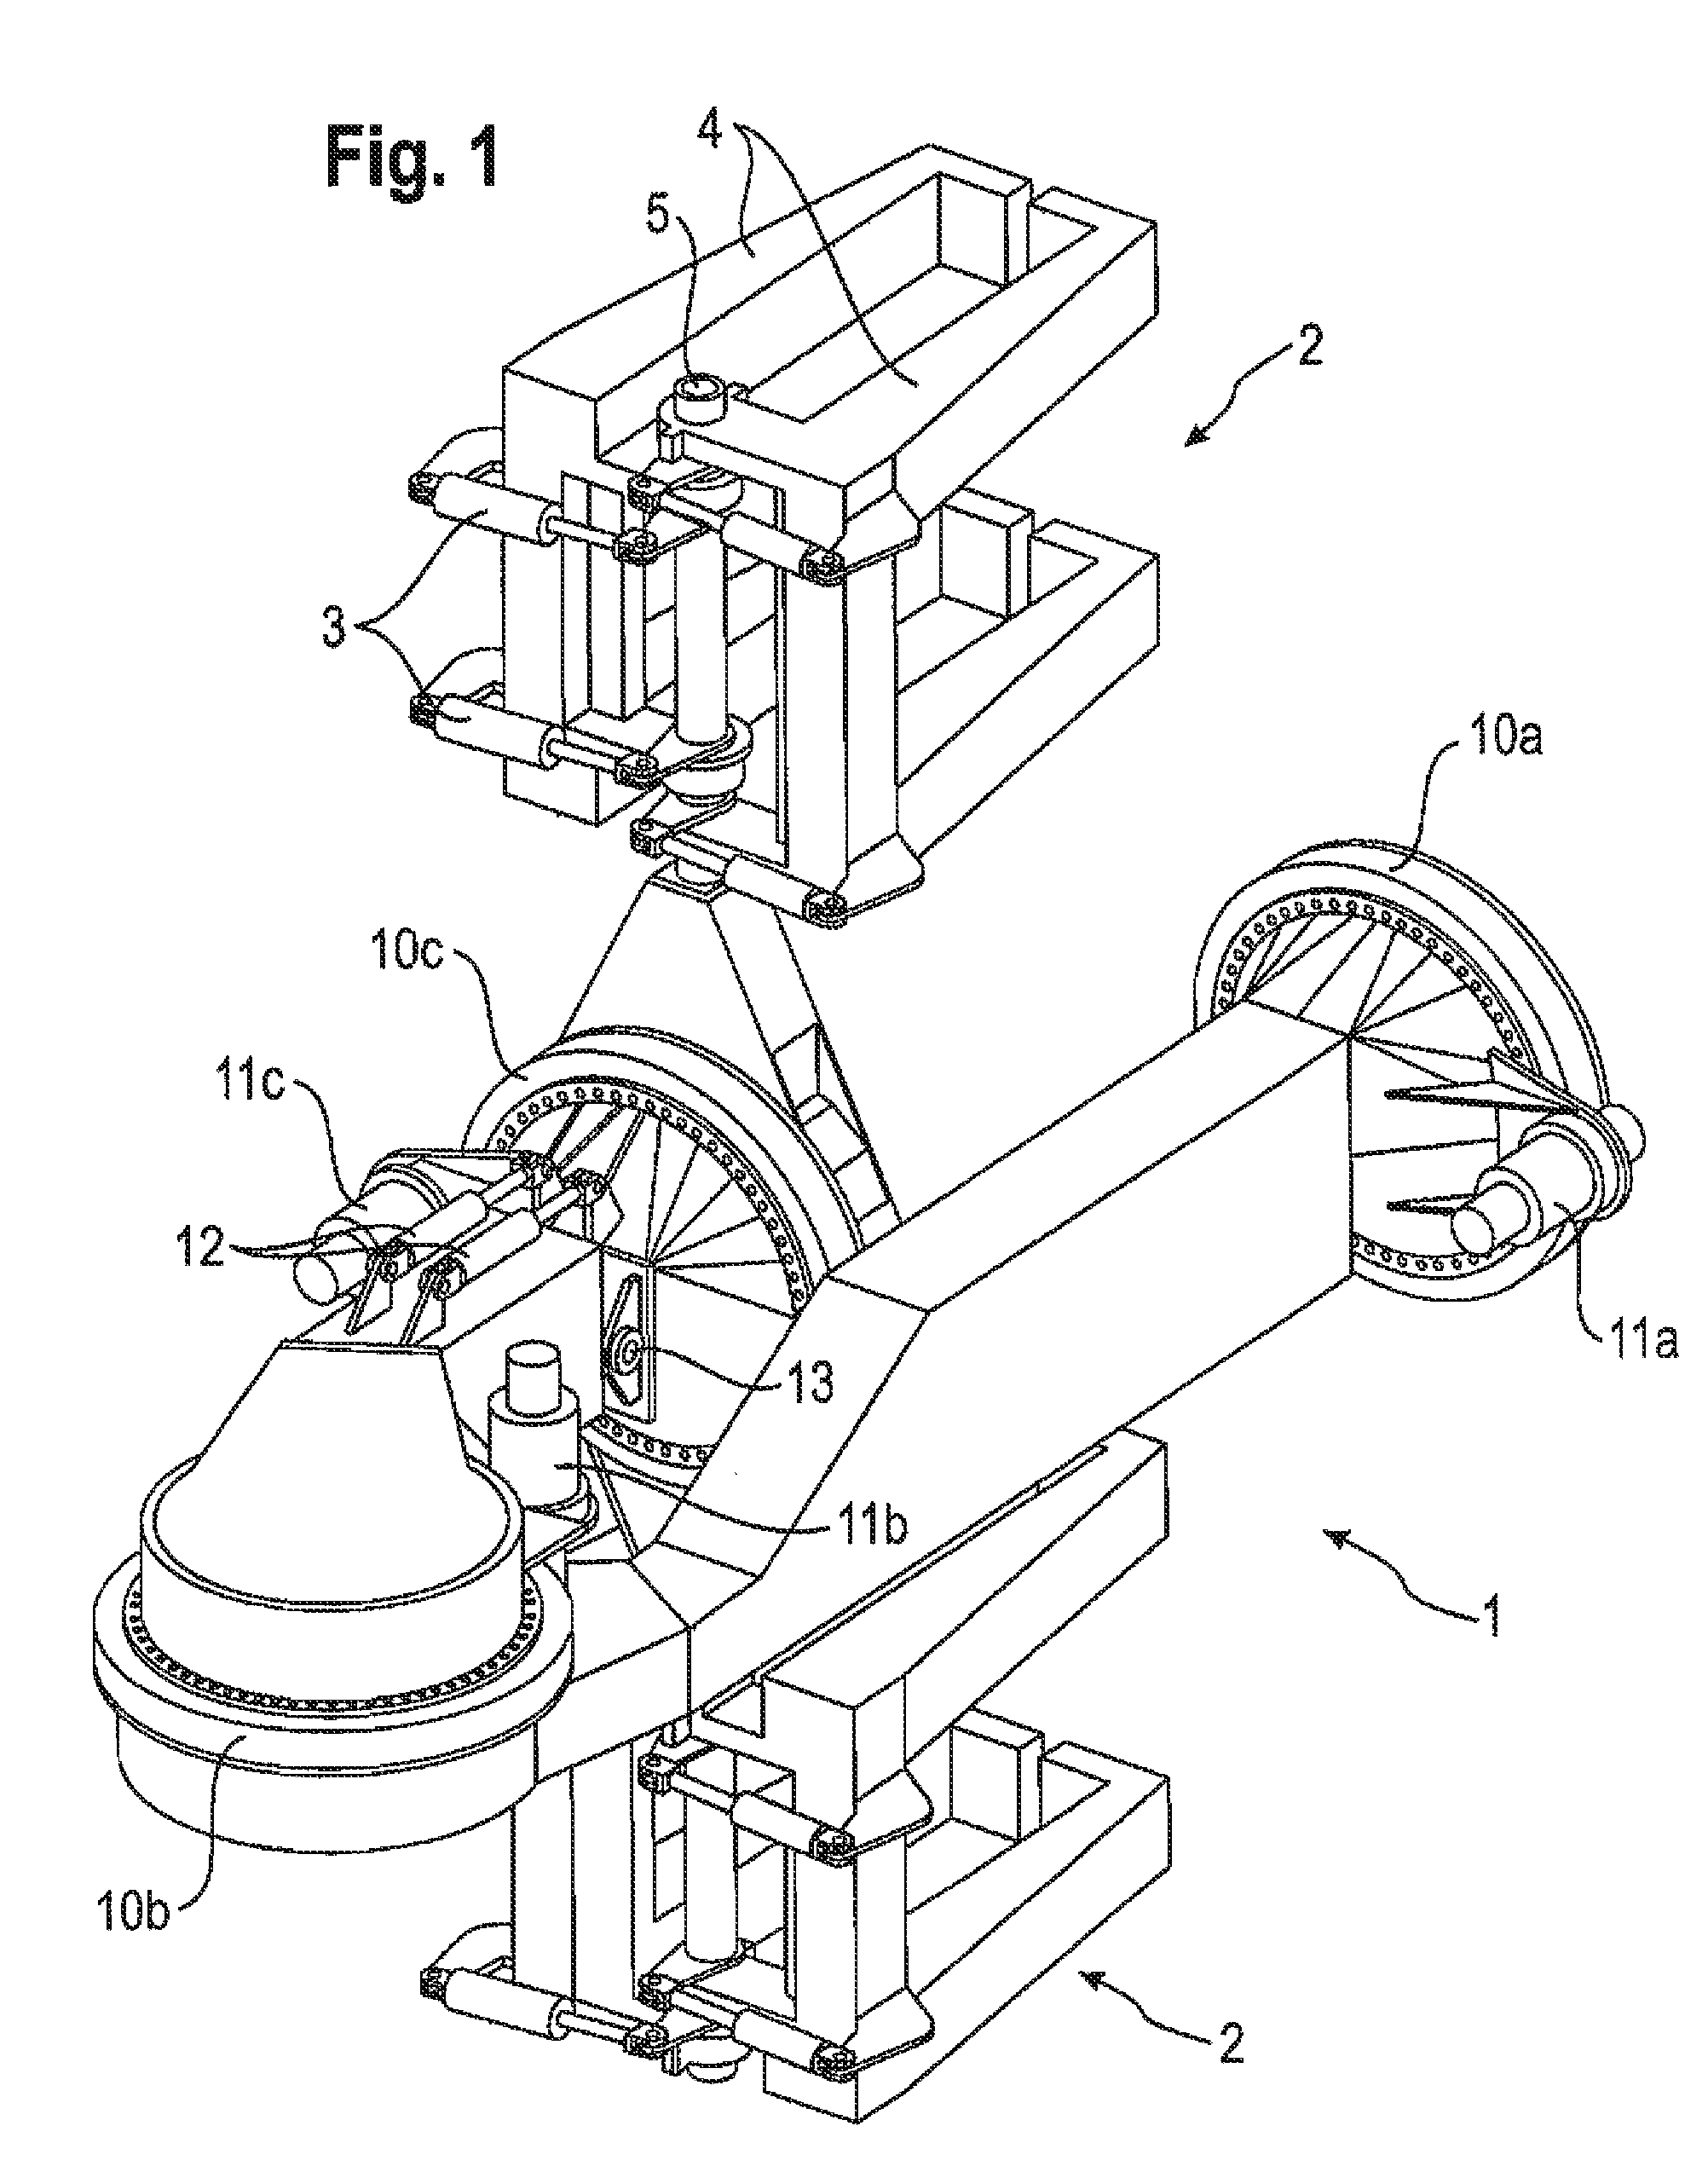 Manipulator for the assembly of rotor blades of a wind power installation